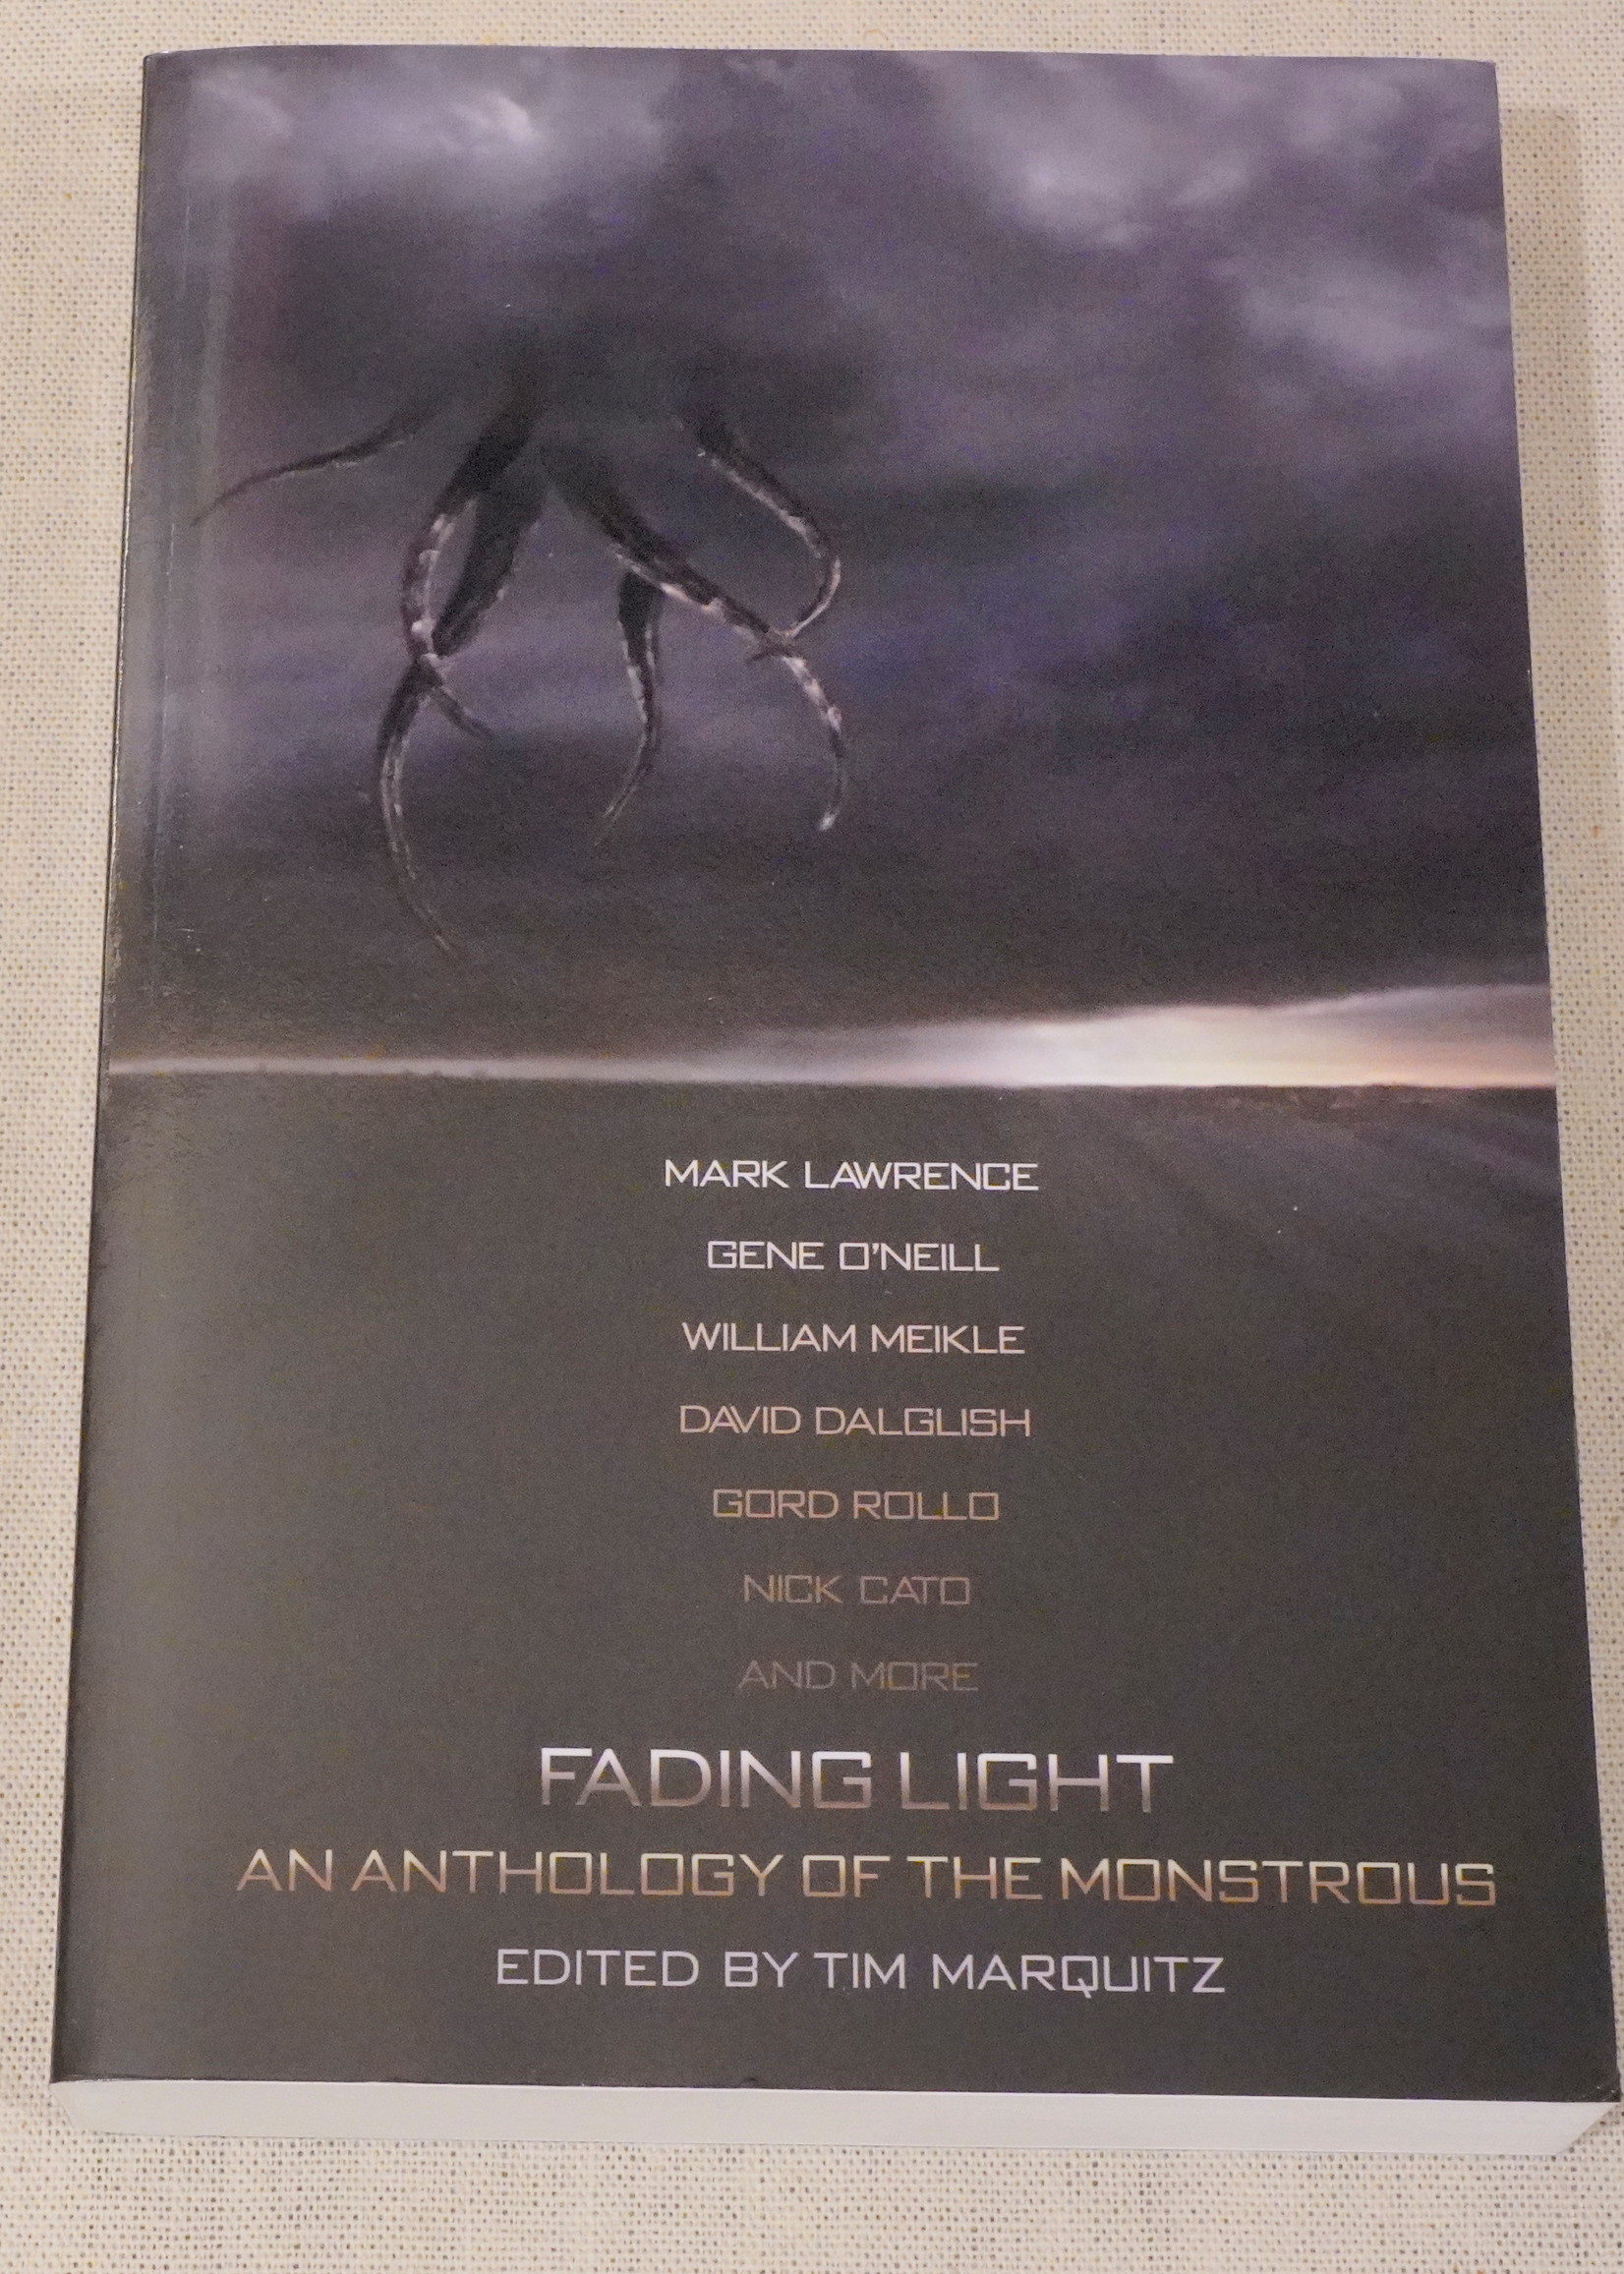 Fading Light - An Anthology of the Monstrous